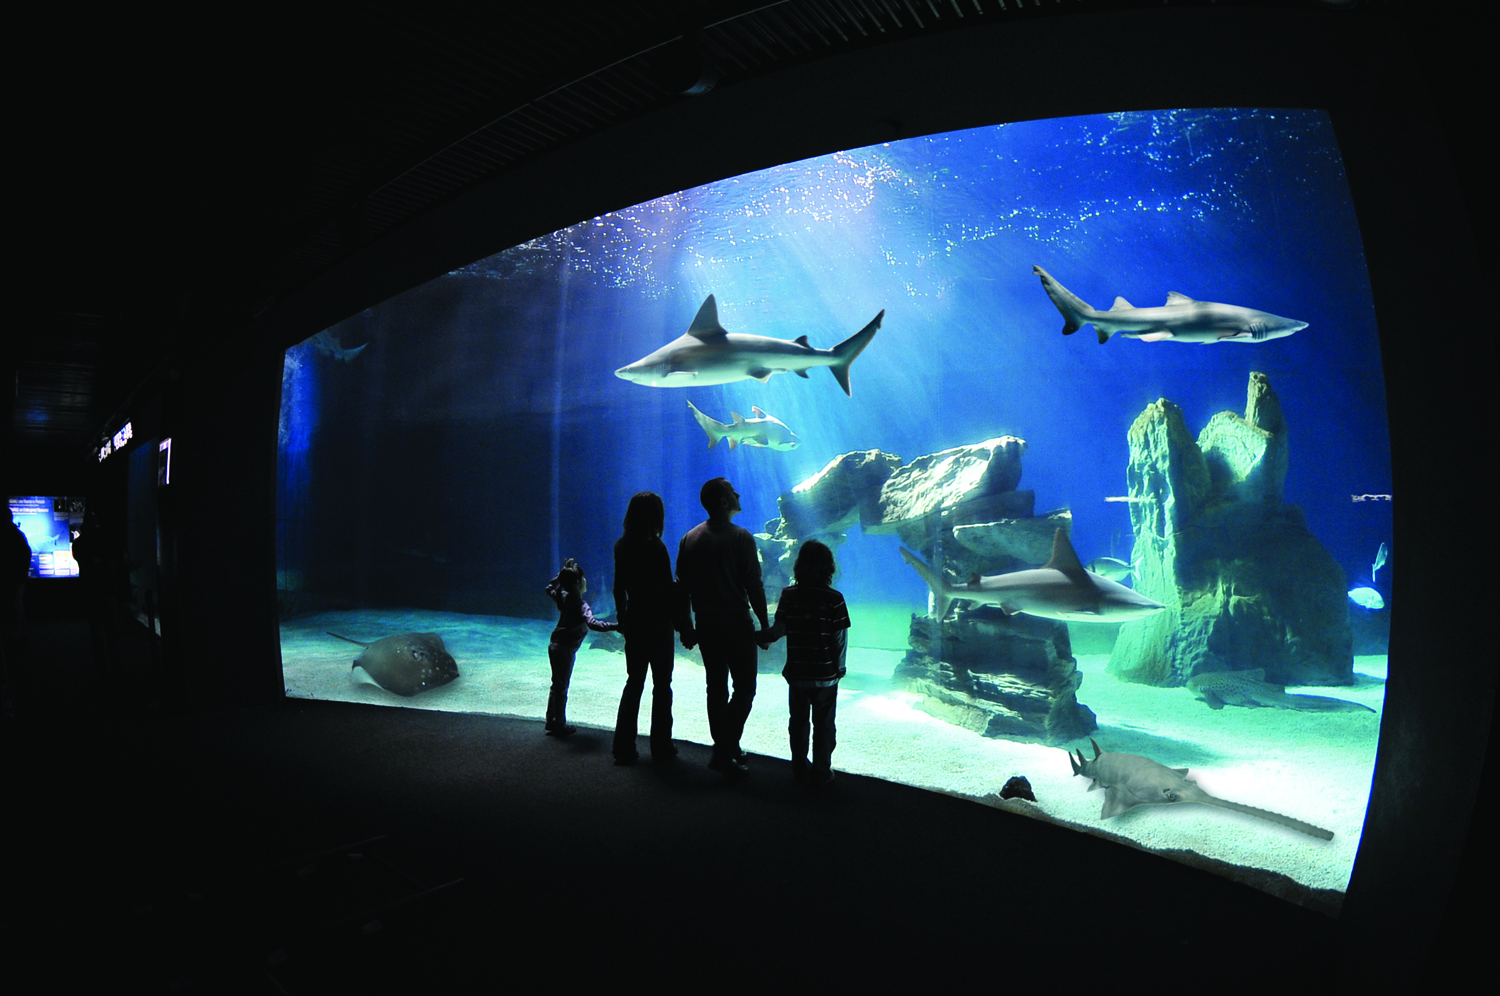 MSC Cruises offers an exclusive tour of Italy’s largest aquarium.